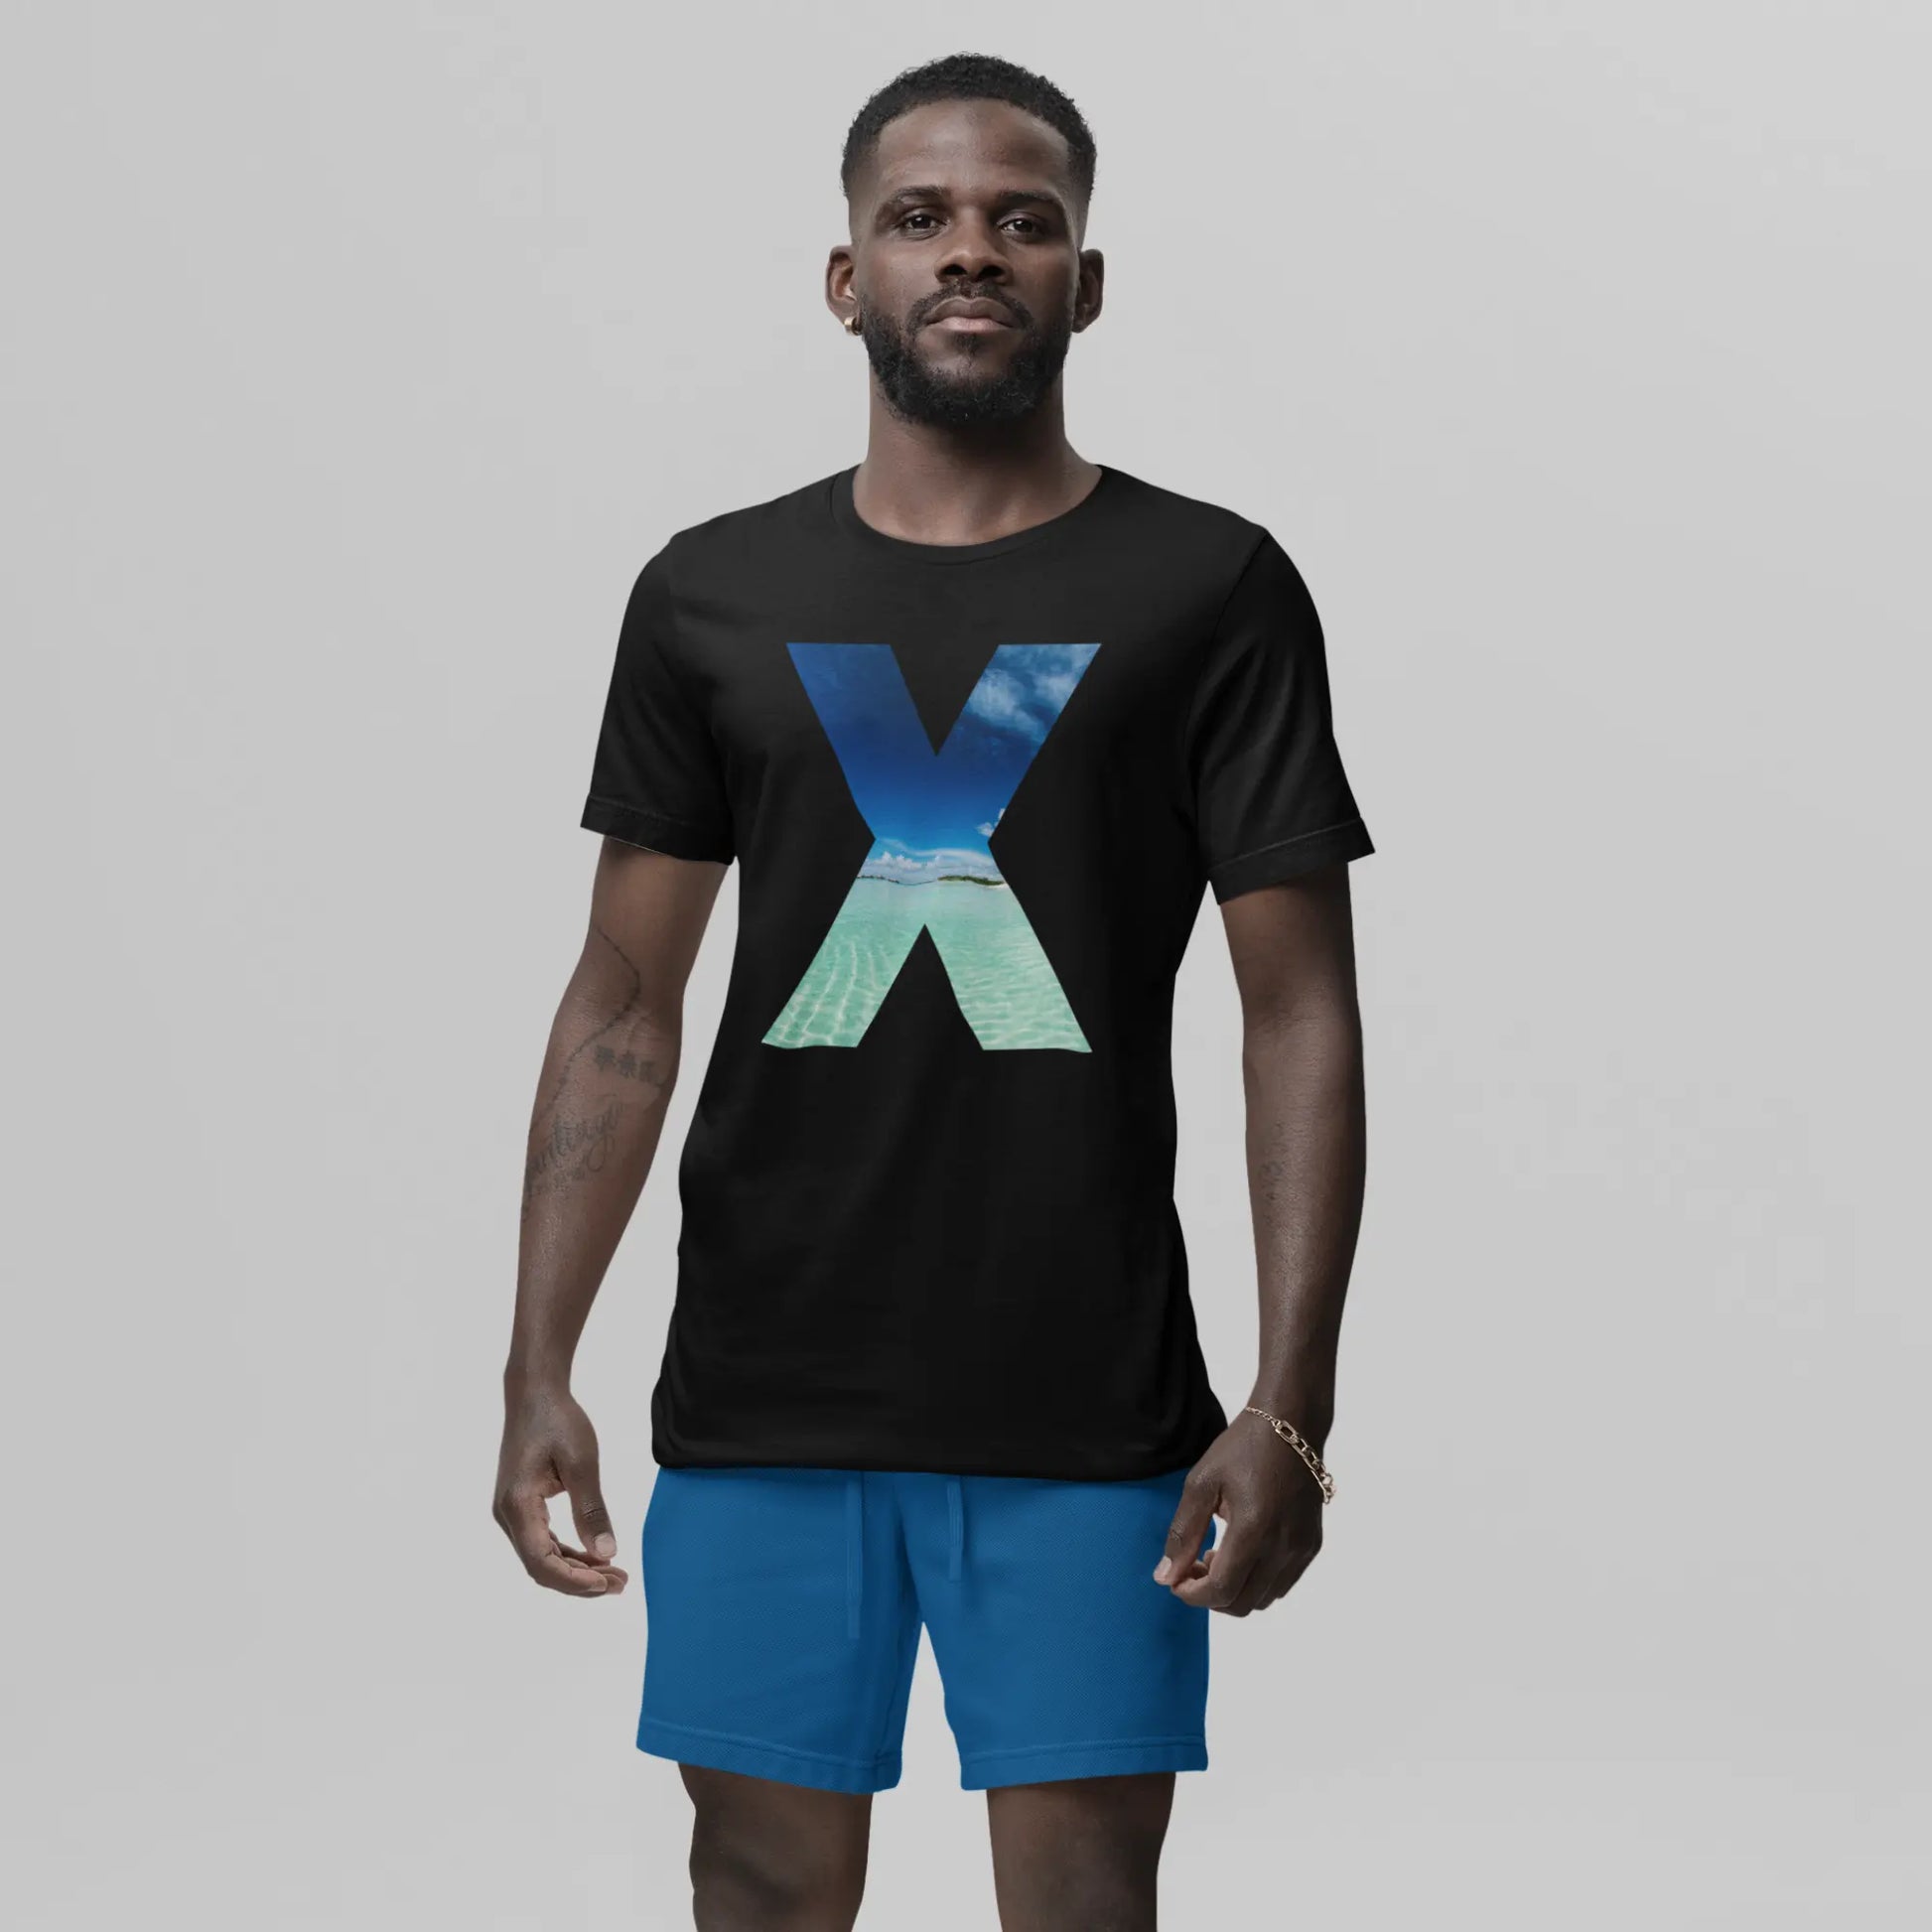  A confident man stands outdoors in a relaxed stance, wearing a black t-shirt featuring a stylized 'X' with a sea wave print within it. 